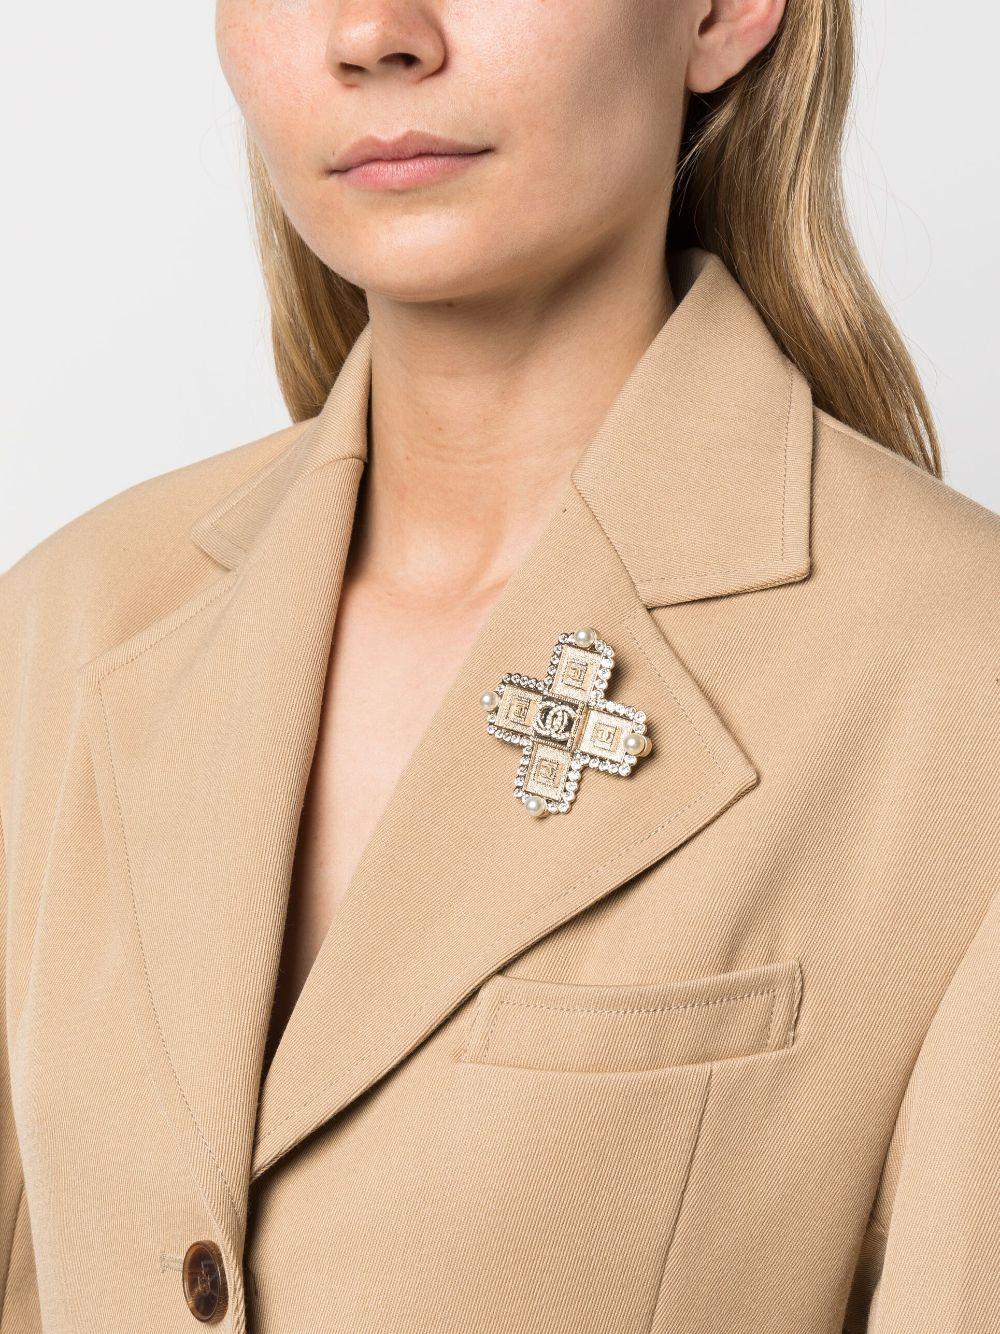 Chanel 2000s CC rhinestone-embellished cross brooch featuring gold-plated hardware, a cross motif, a signature interlocking CC logo, rhinestone embellishment, faux-pearl embellishment, a pin fastening, a back plaque.
Circa 2000s . Made in